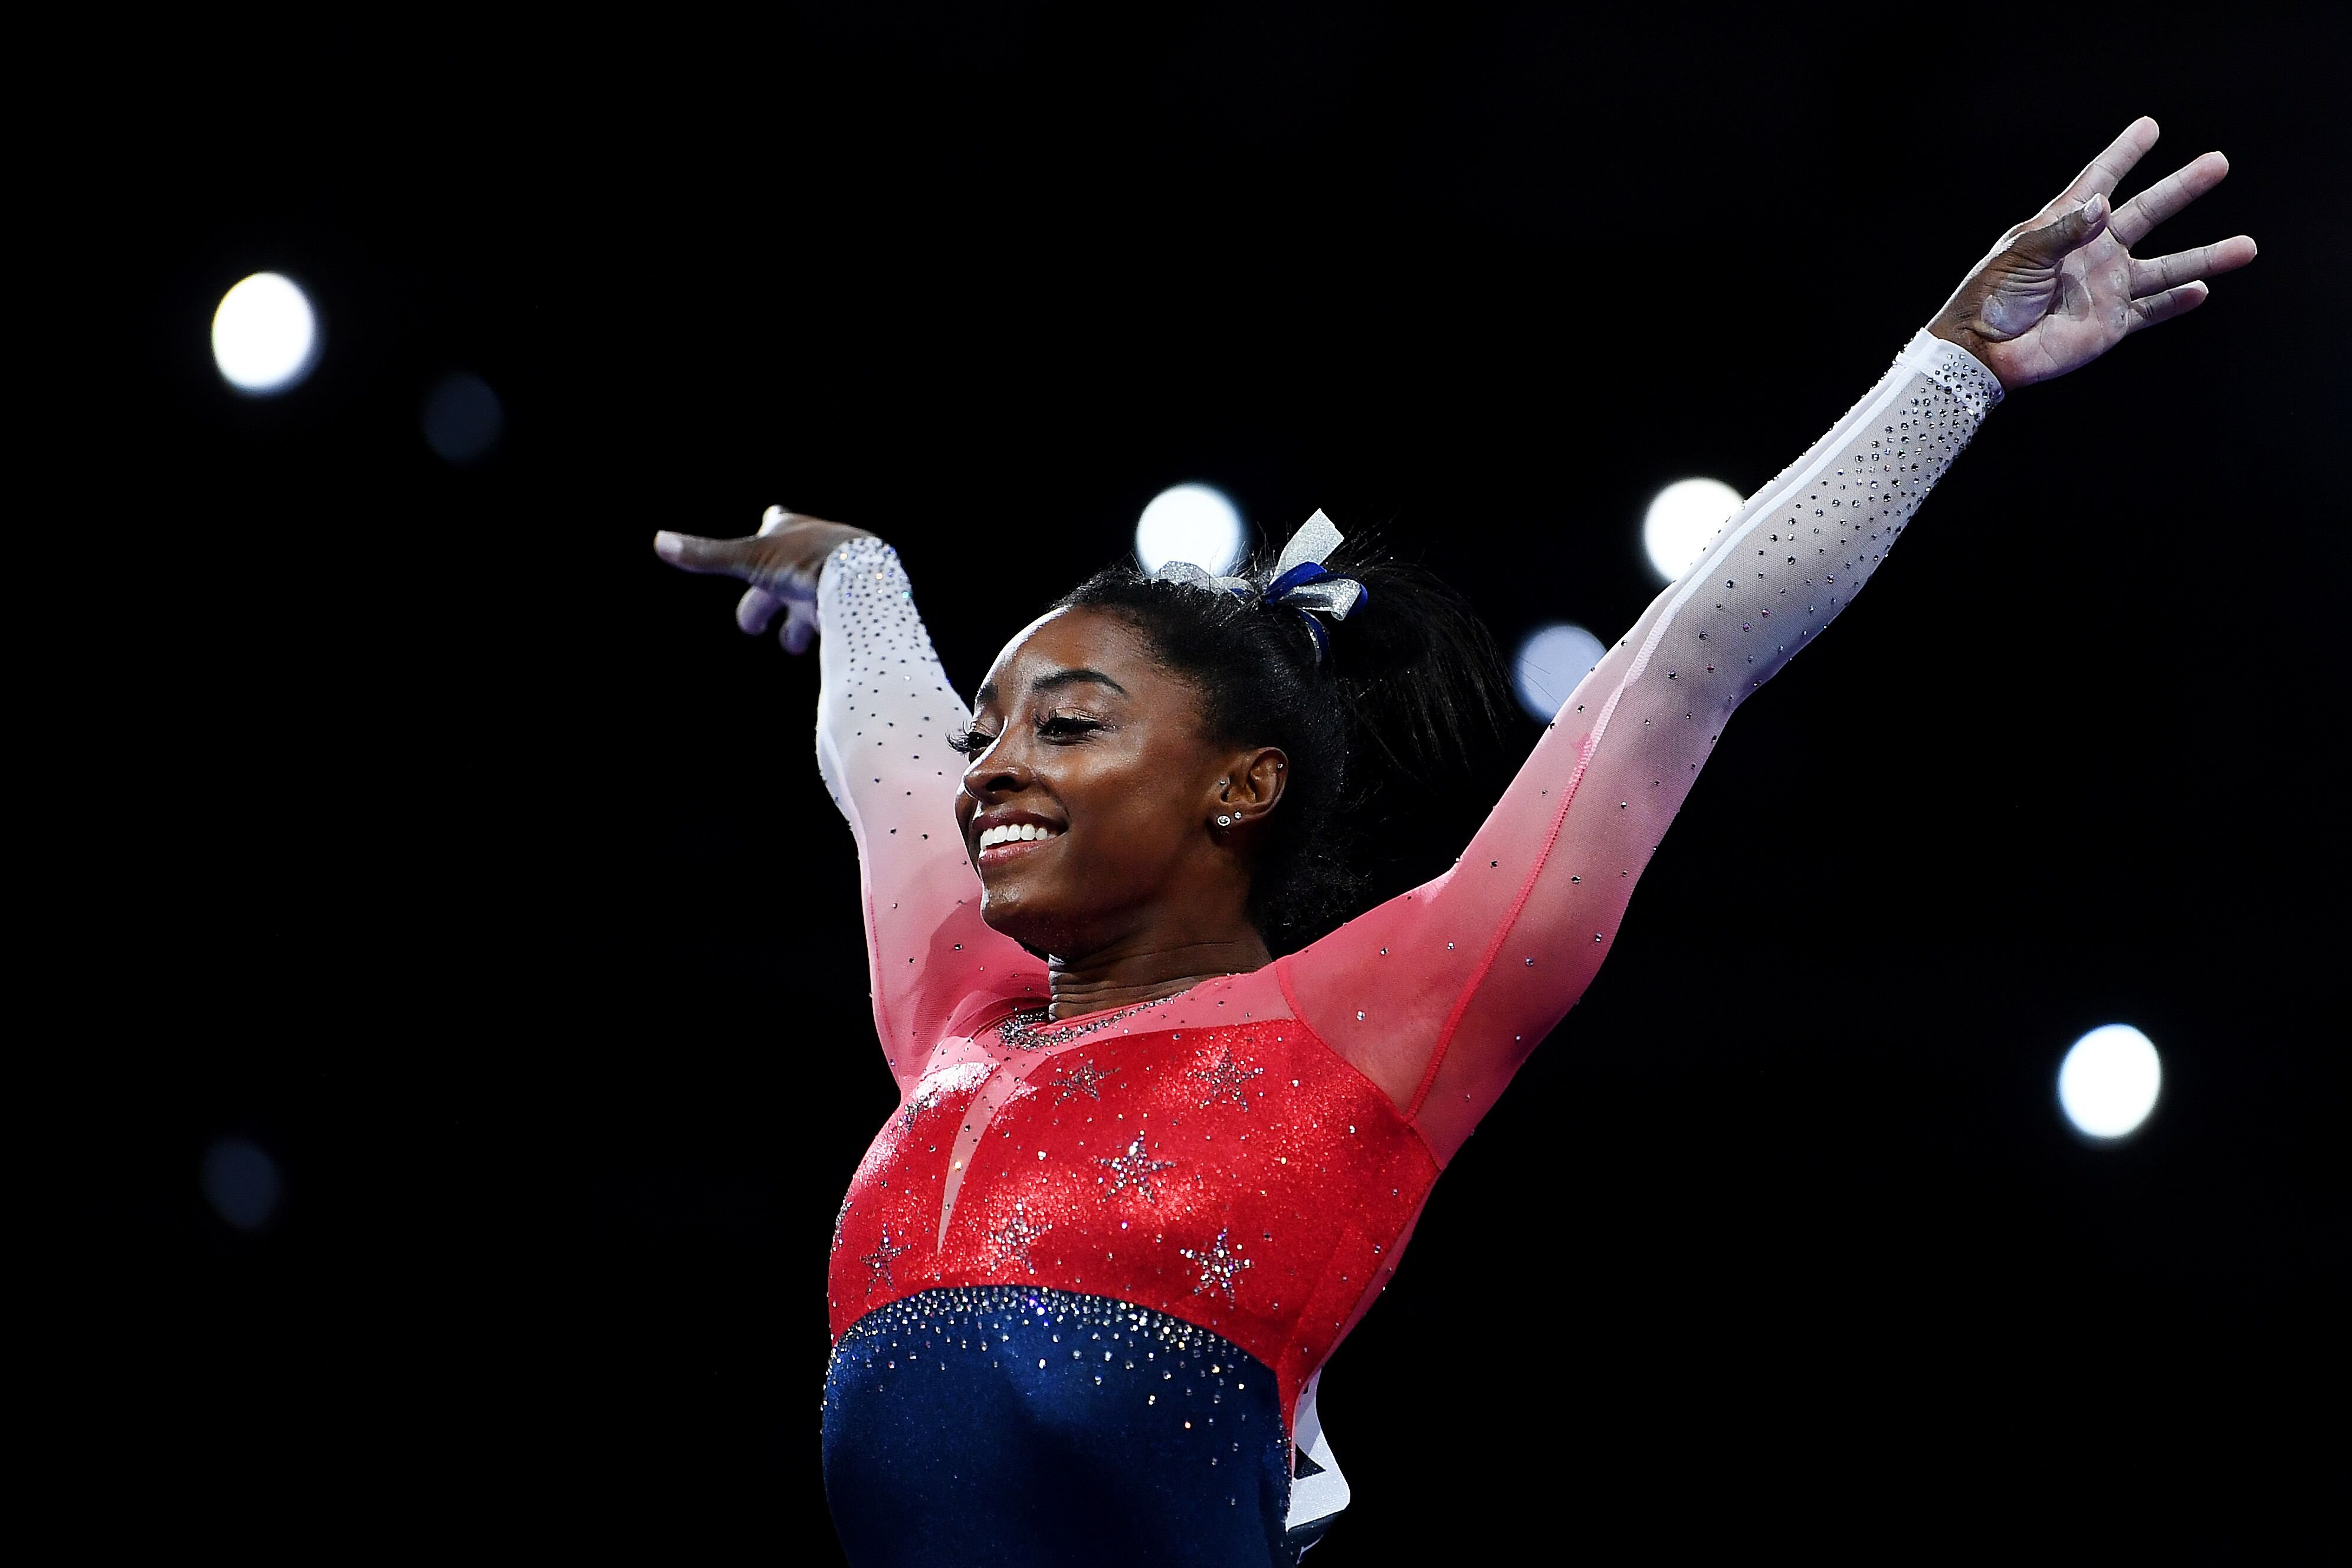 Simone Biles of USA performs on the Vault during the Women's Team Final on Day 5 of the FIG Artistic Gymnastics World Championships on October 08, 2019 | Photo: Getty Images